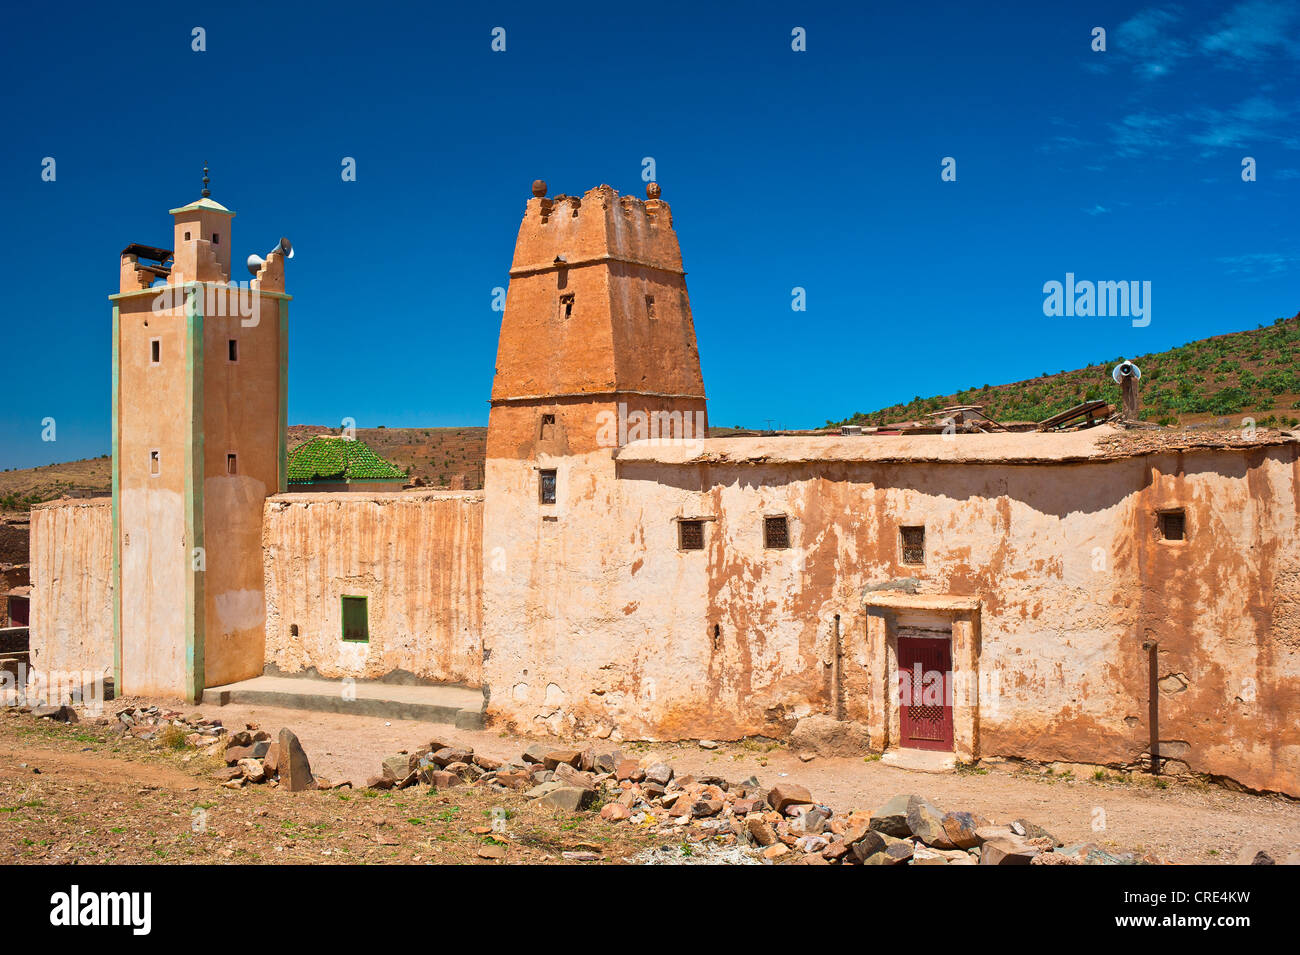 Islamic mosque with a minaret and part of a Kasbah, mud fortress, residential Berber castle, Tighremt, village of Ait Ourhaine Stock Photo